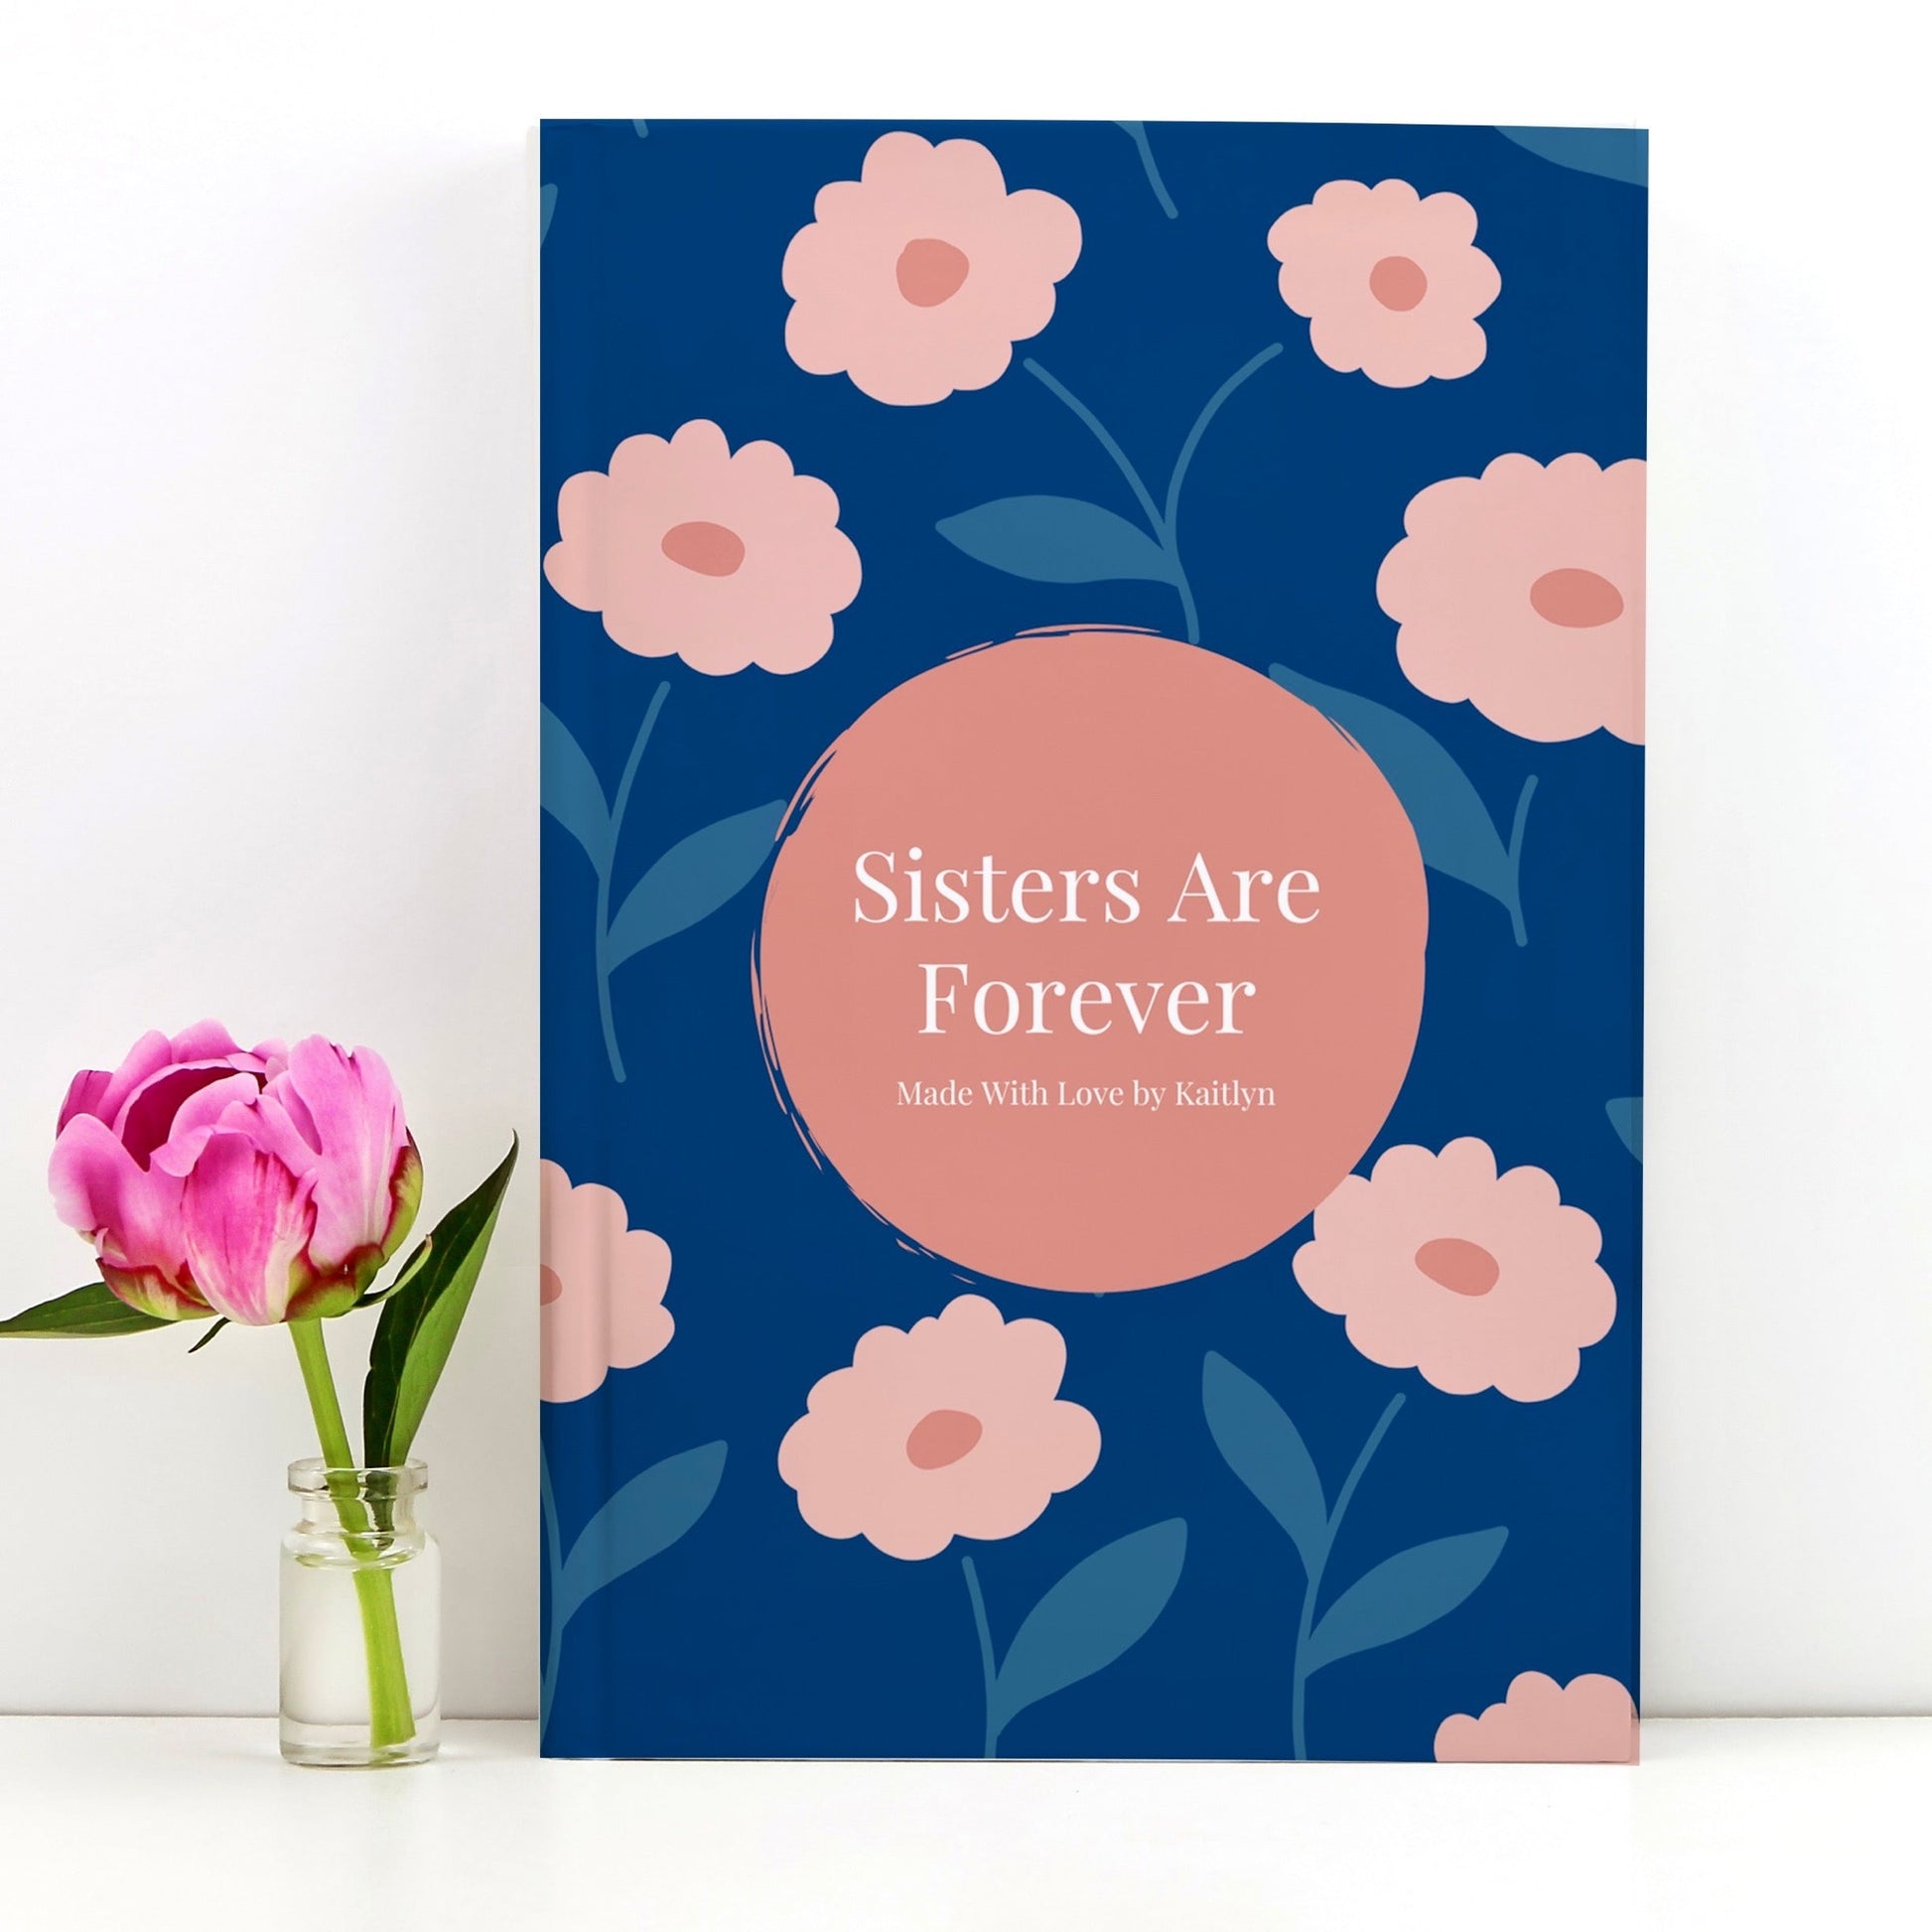 Personalized gift for sister. Custom book for sister. Sisters are forever title. Luhvee Books.